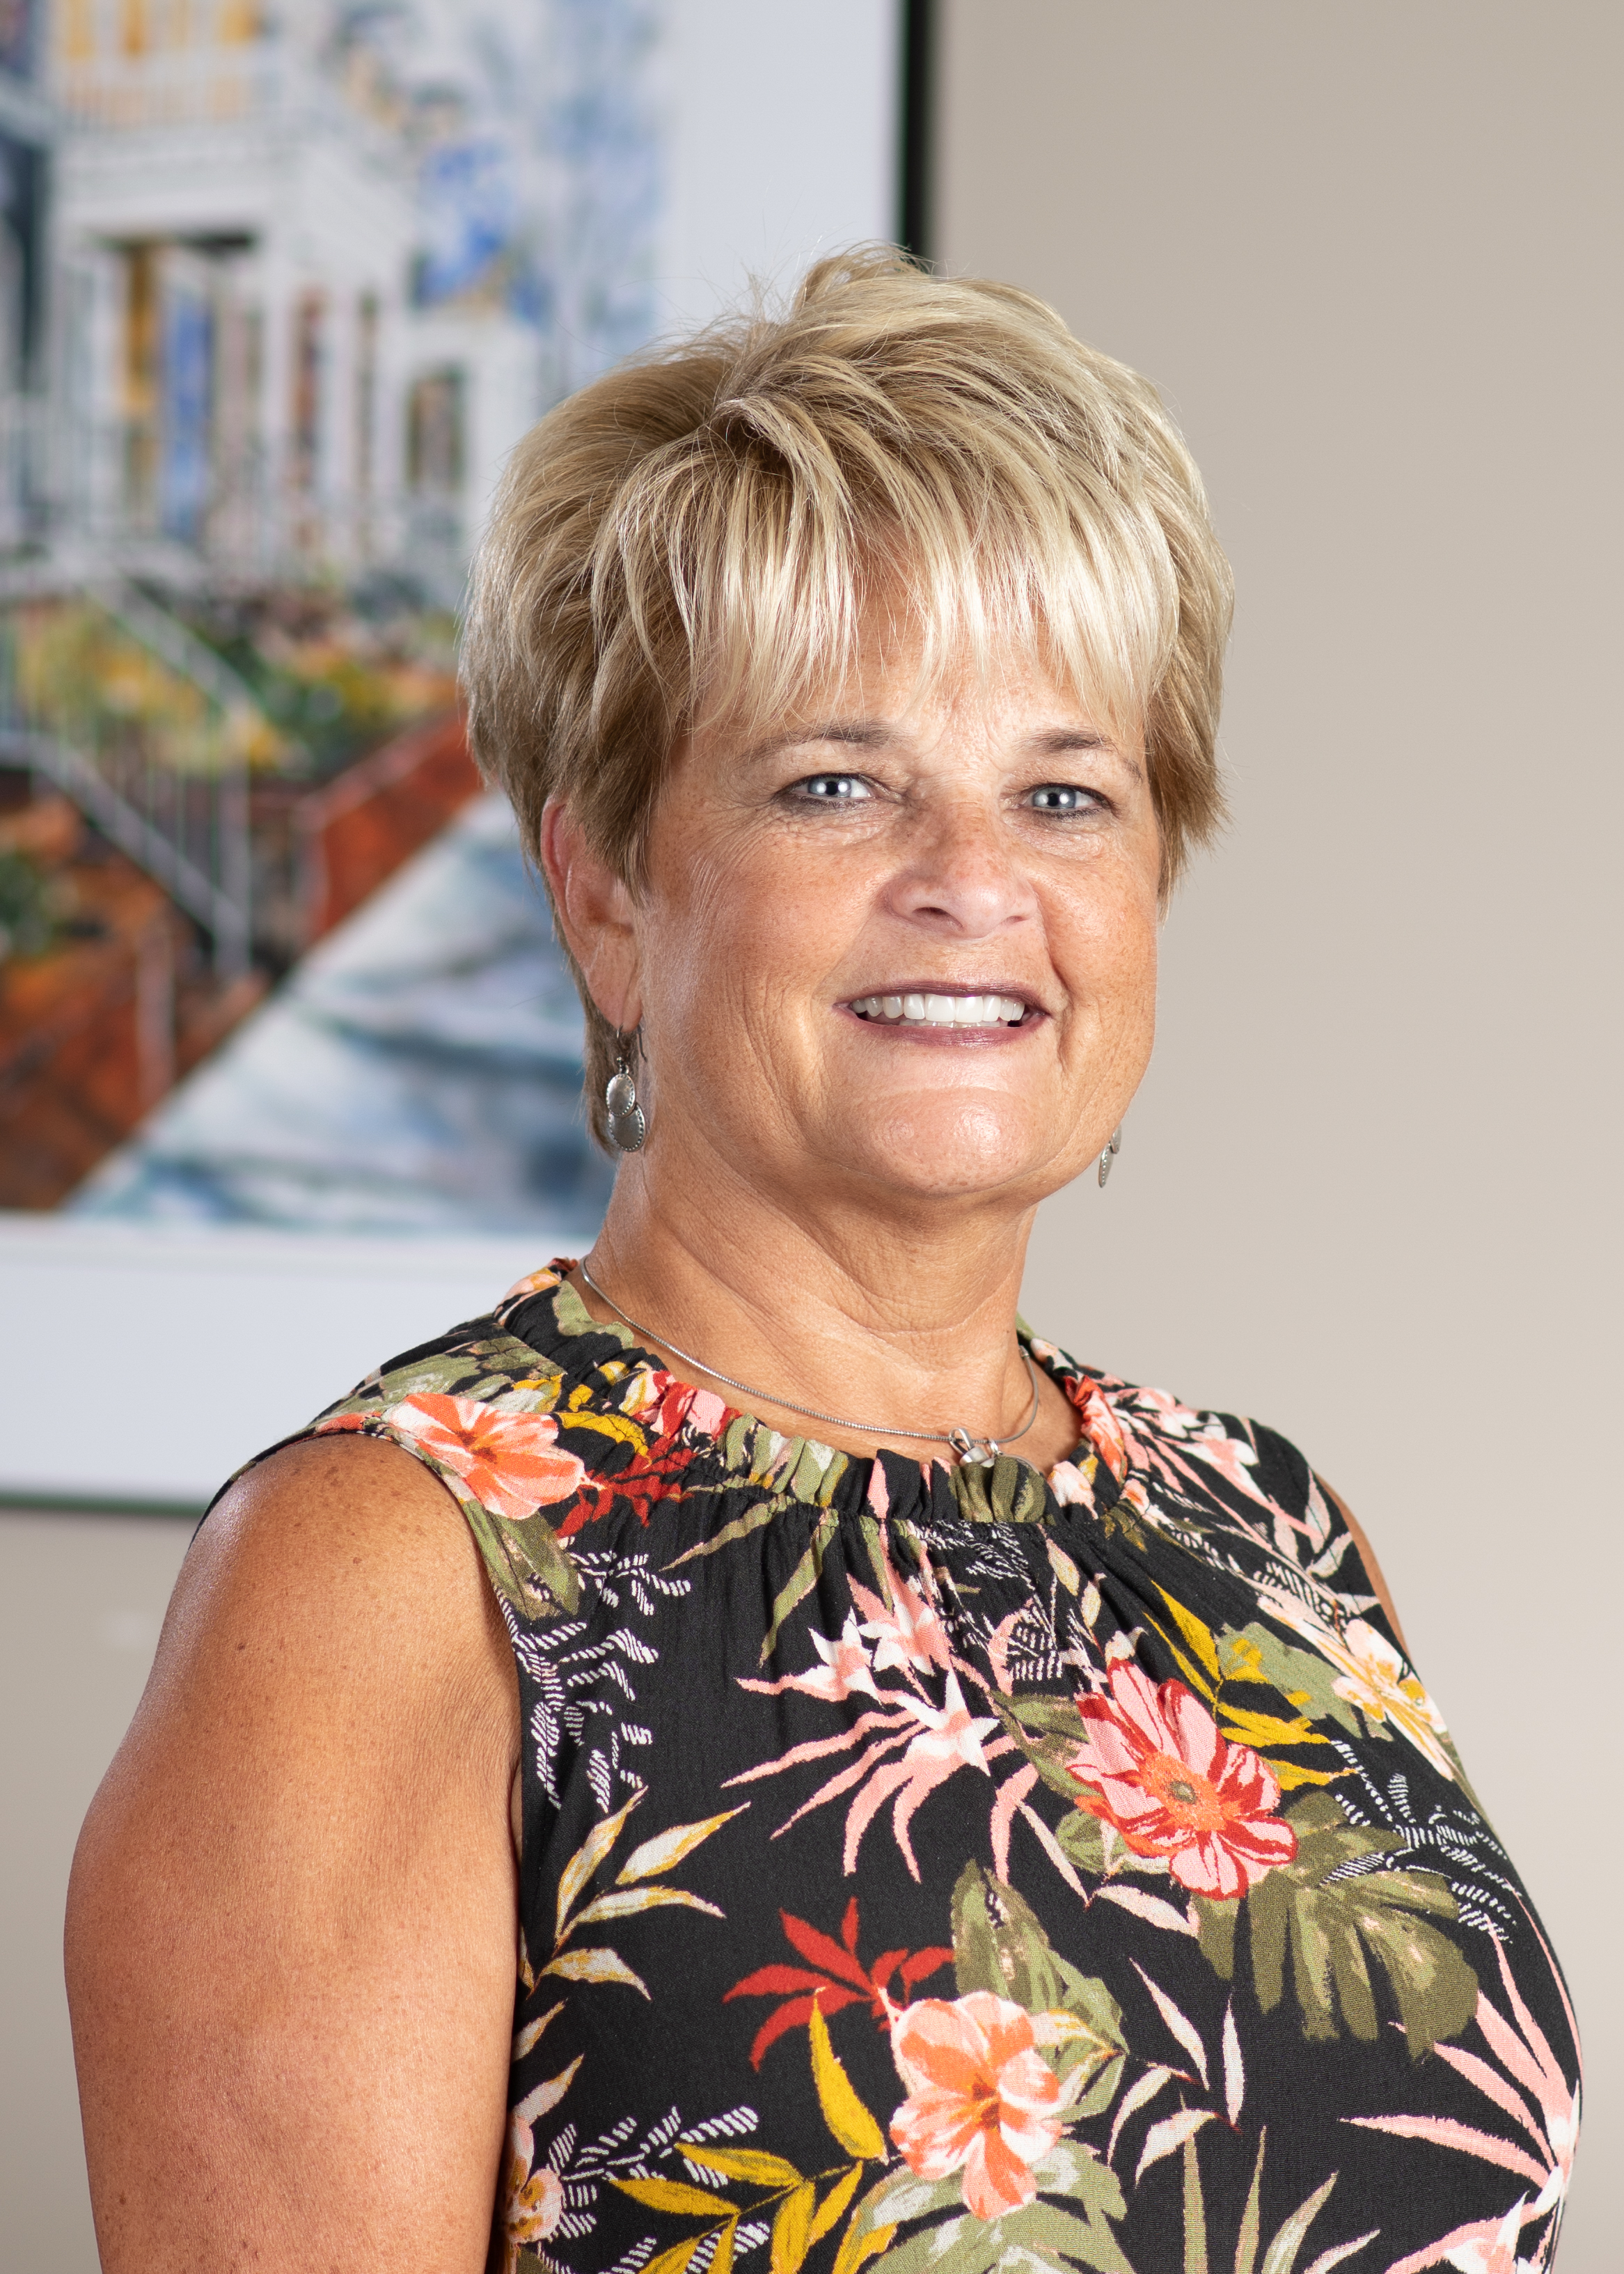 Sharon Powers, Office Manager of Virginia Family Dentistry Powhatan